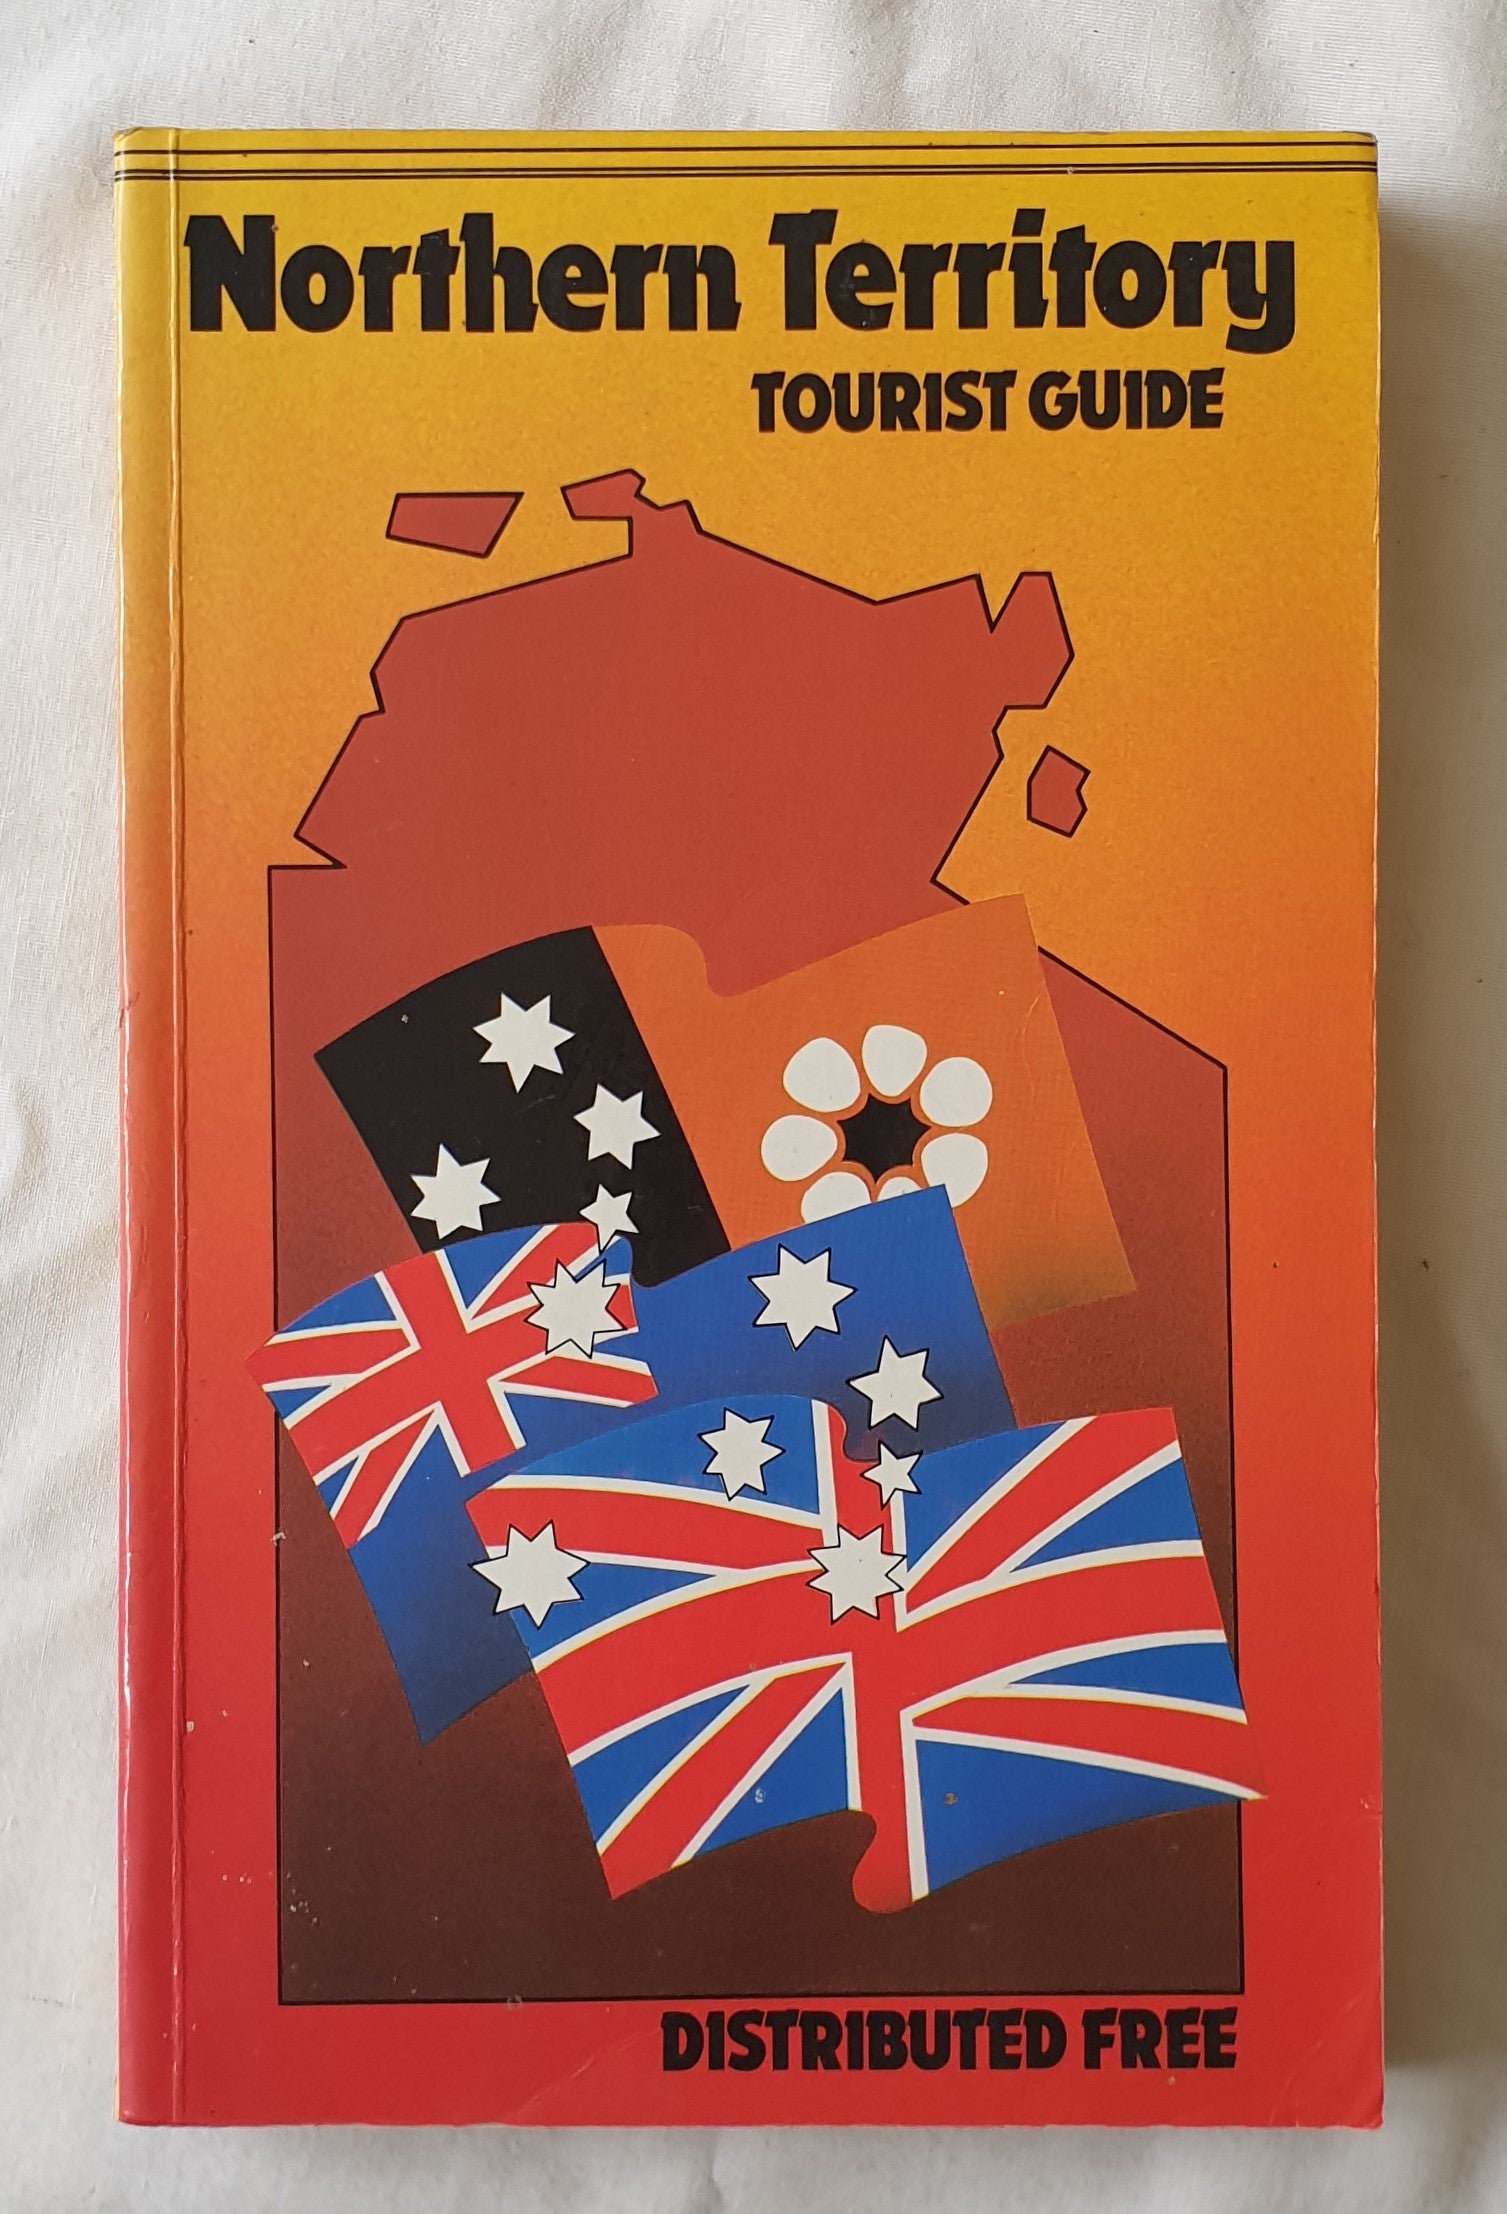 Northern Territory Tourist Guide